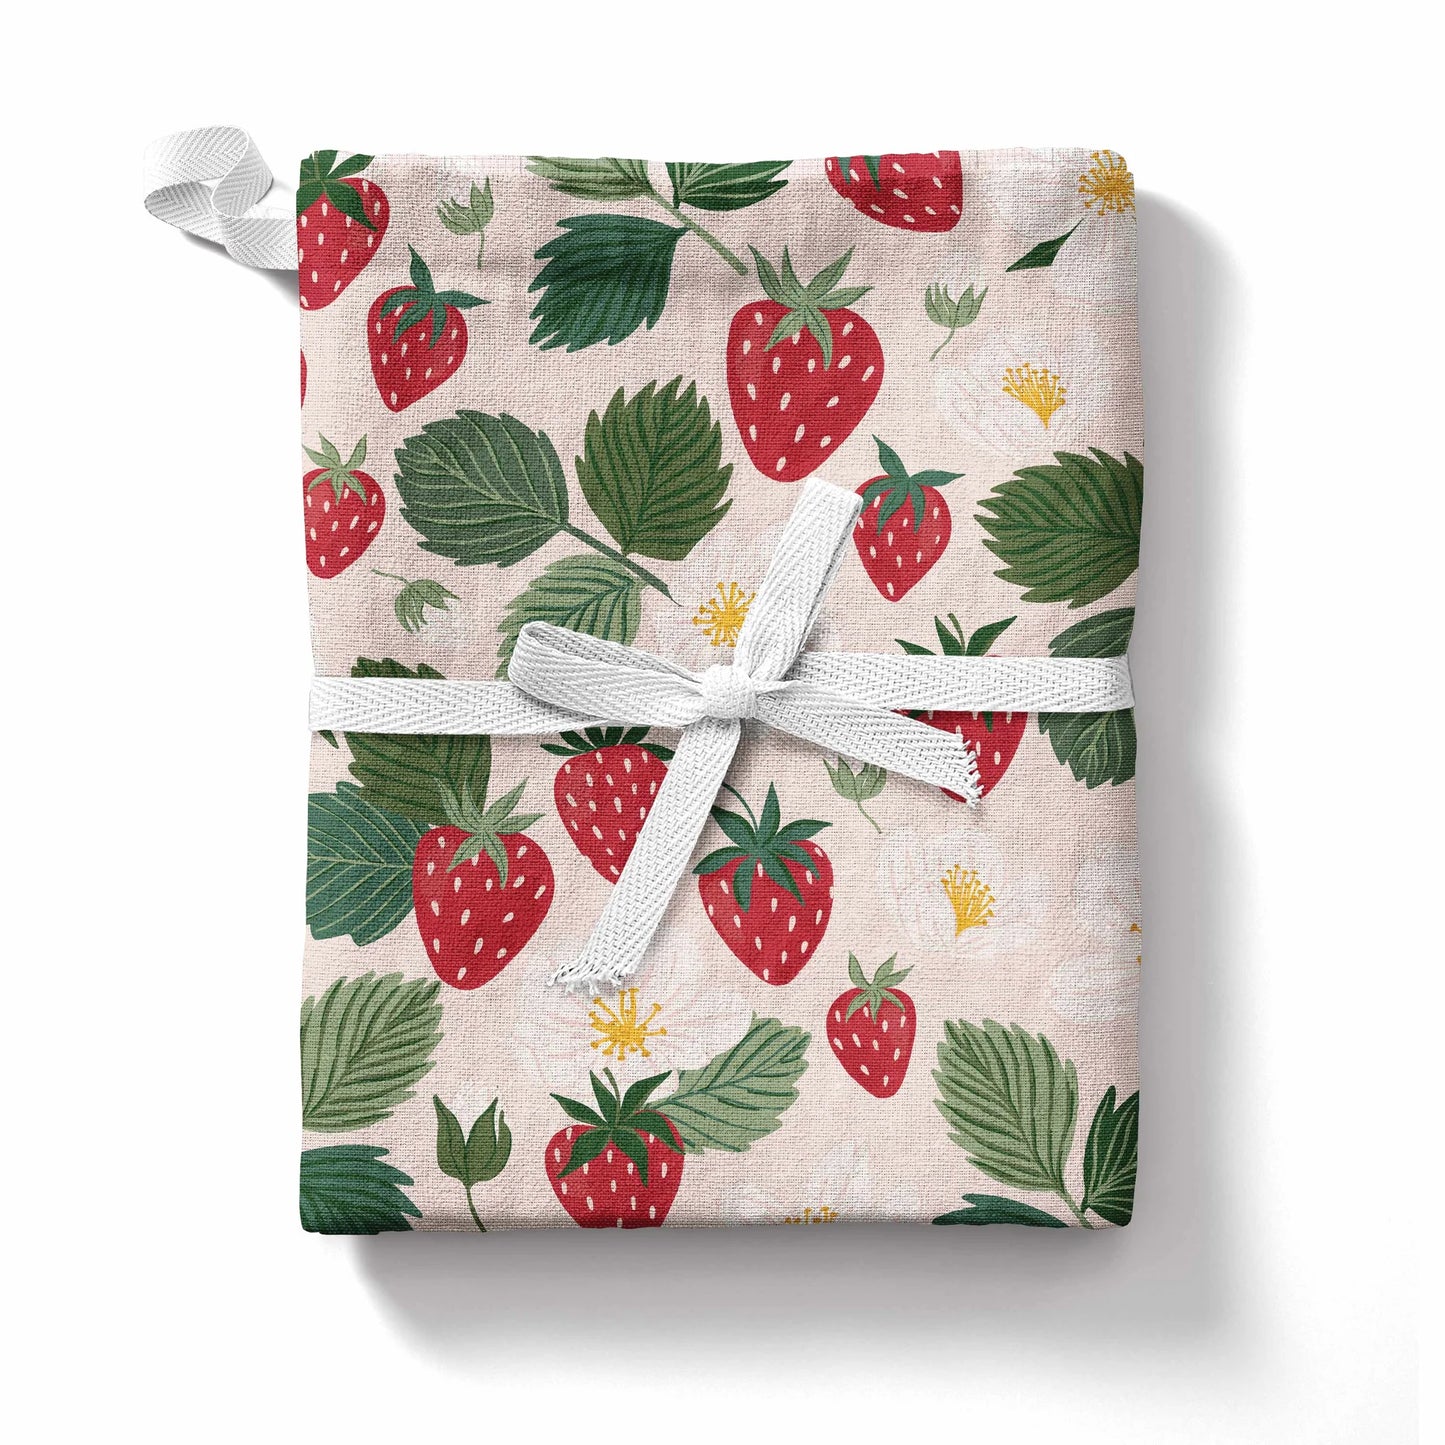 Tea towel in strawberry patch print 